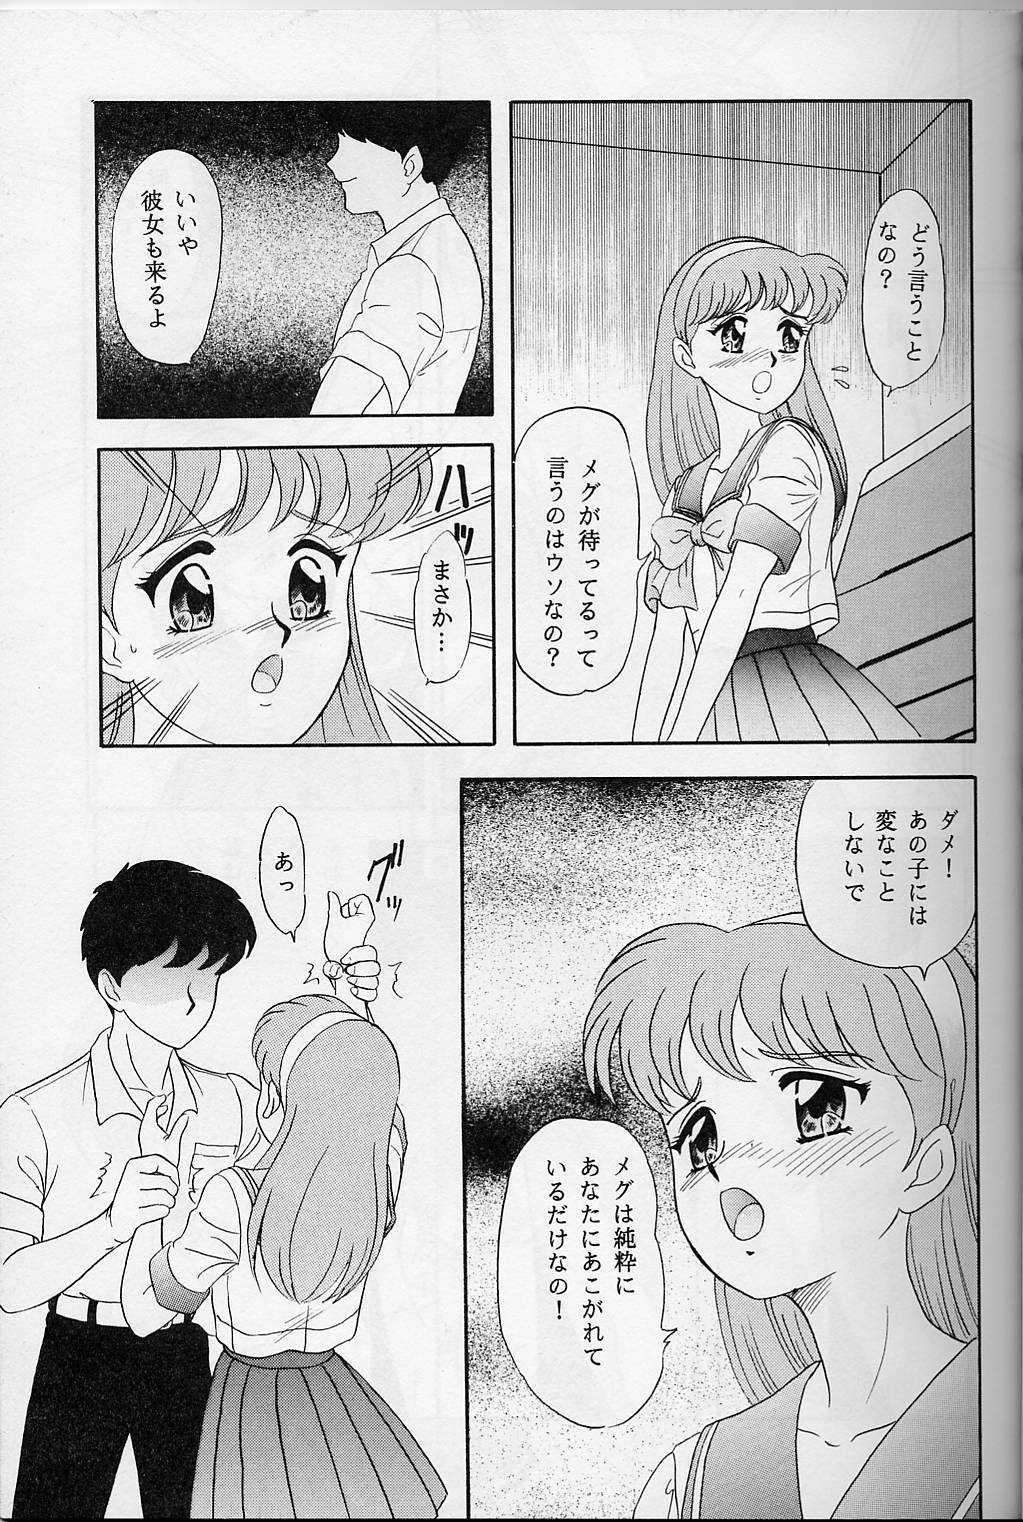 Ejaculations Lunch Time 5 - Tokimeki memorial Bdsm - Page 6